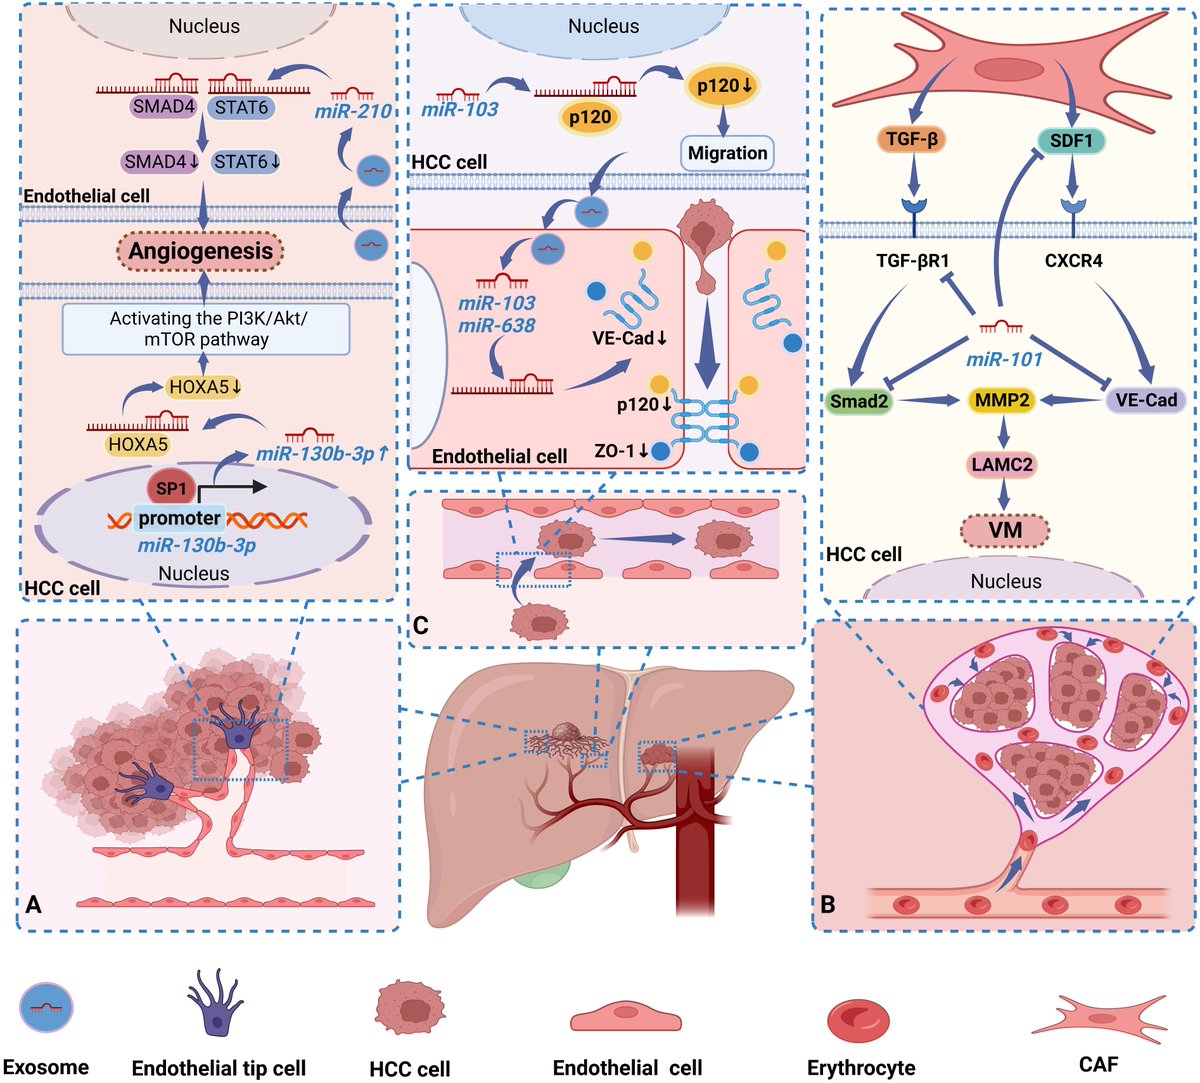 Interesting review of the role of miRNAs on #hepatocarcinoma, these can regulate #progression by affecting the blood vessels of tumors.
@OncoLucus @oncotwitts @oncologician 
frontiersin.org/articles/10.33…